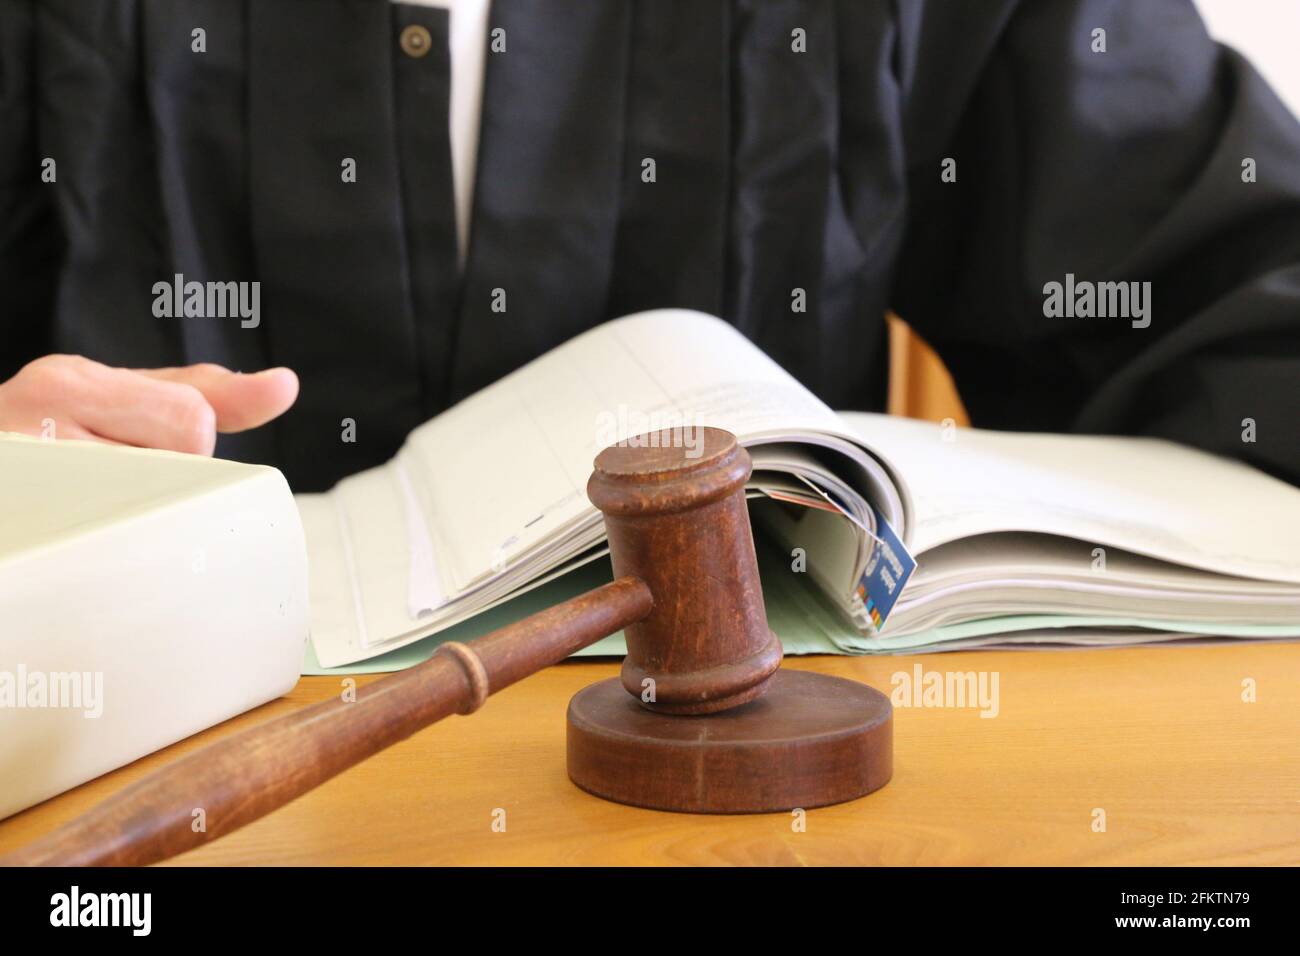 Close up of judge's gavel as symbol image for judgment. Stock Photo